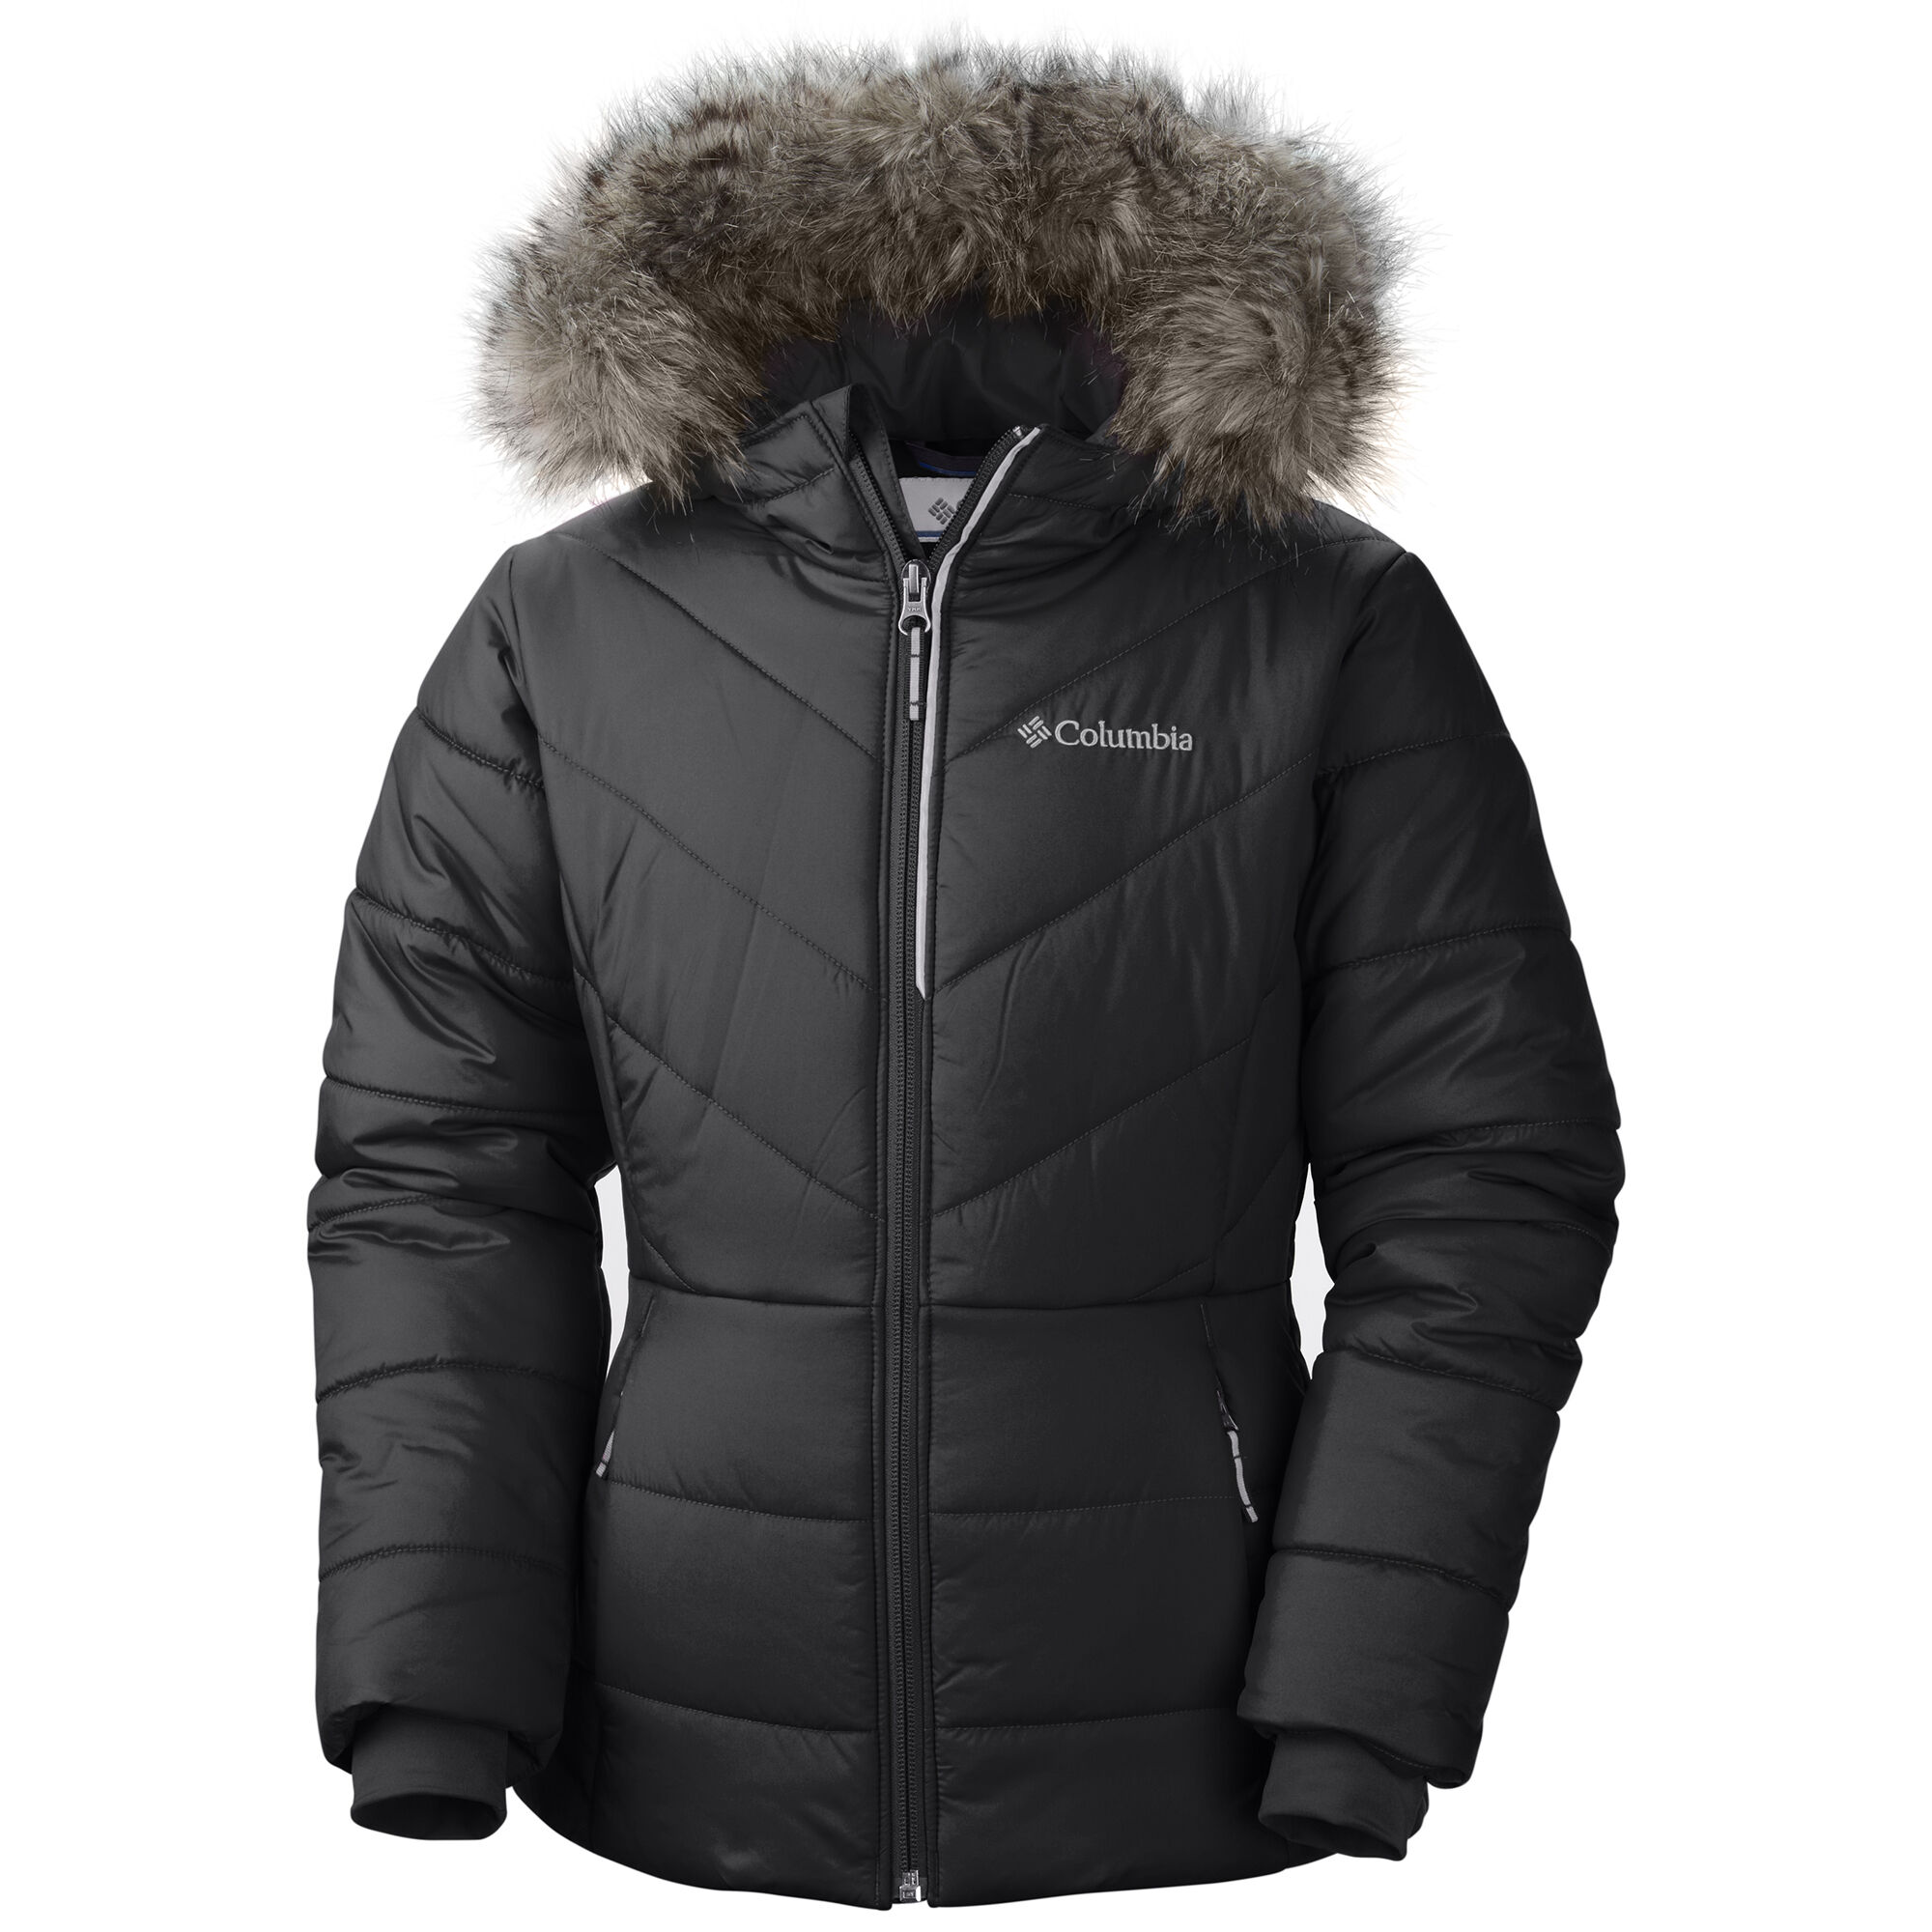 Columbia Omni Shield Jackets Discontinued Cheap Online